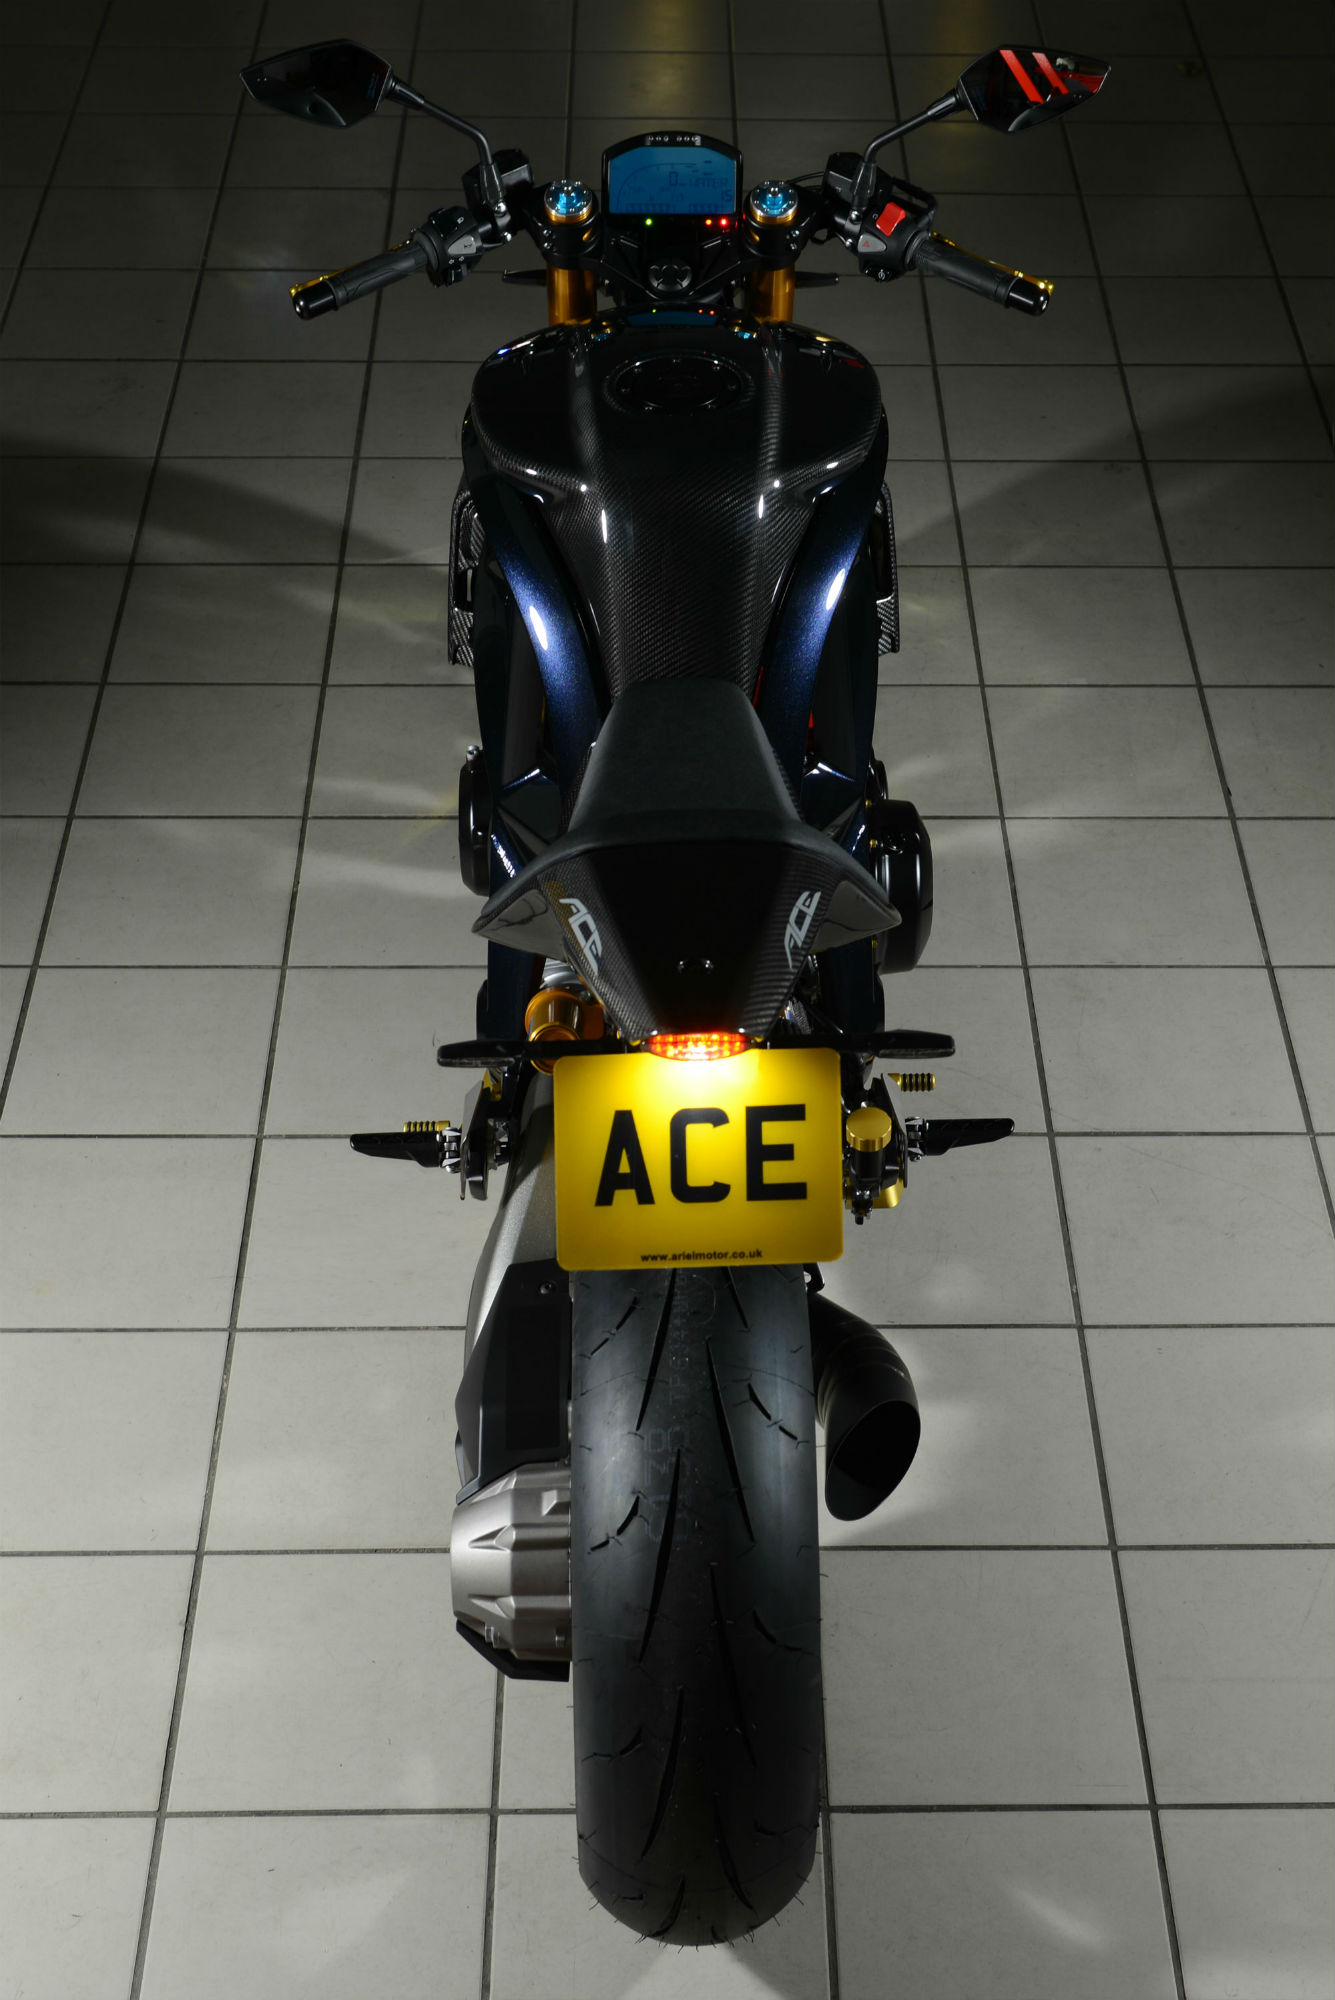 New Ariel Ace R revealed